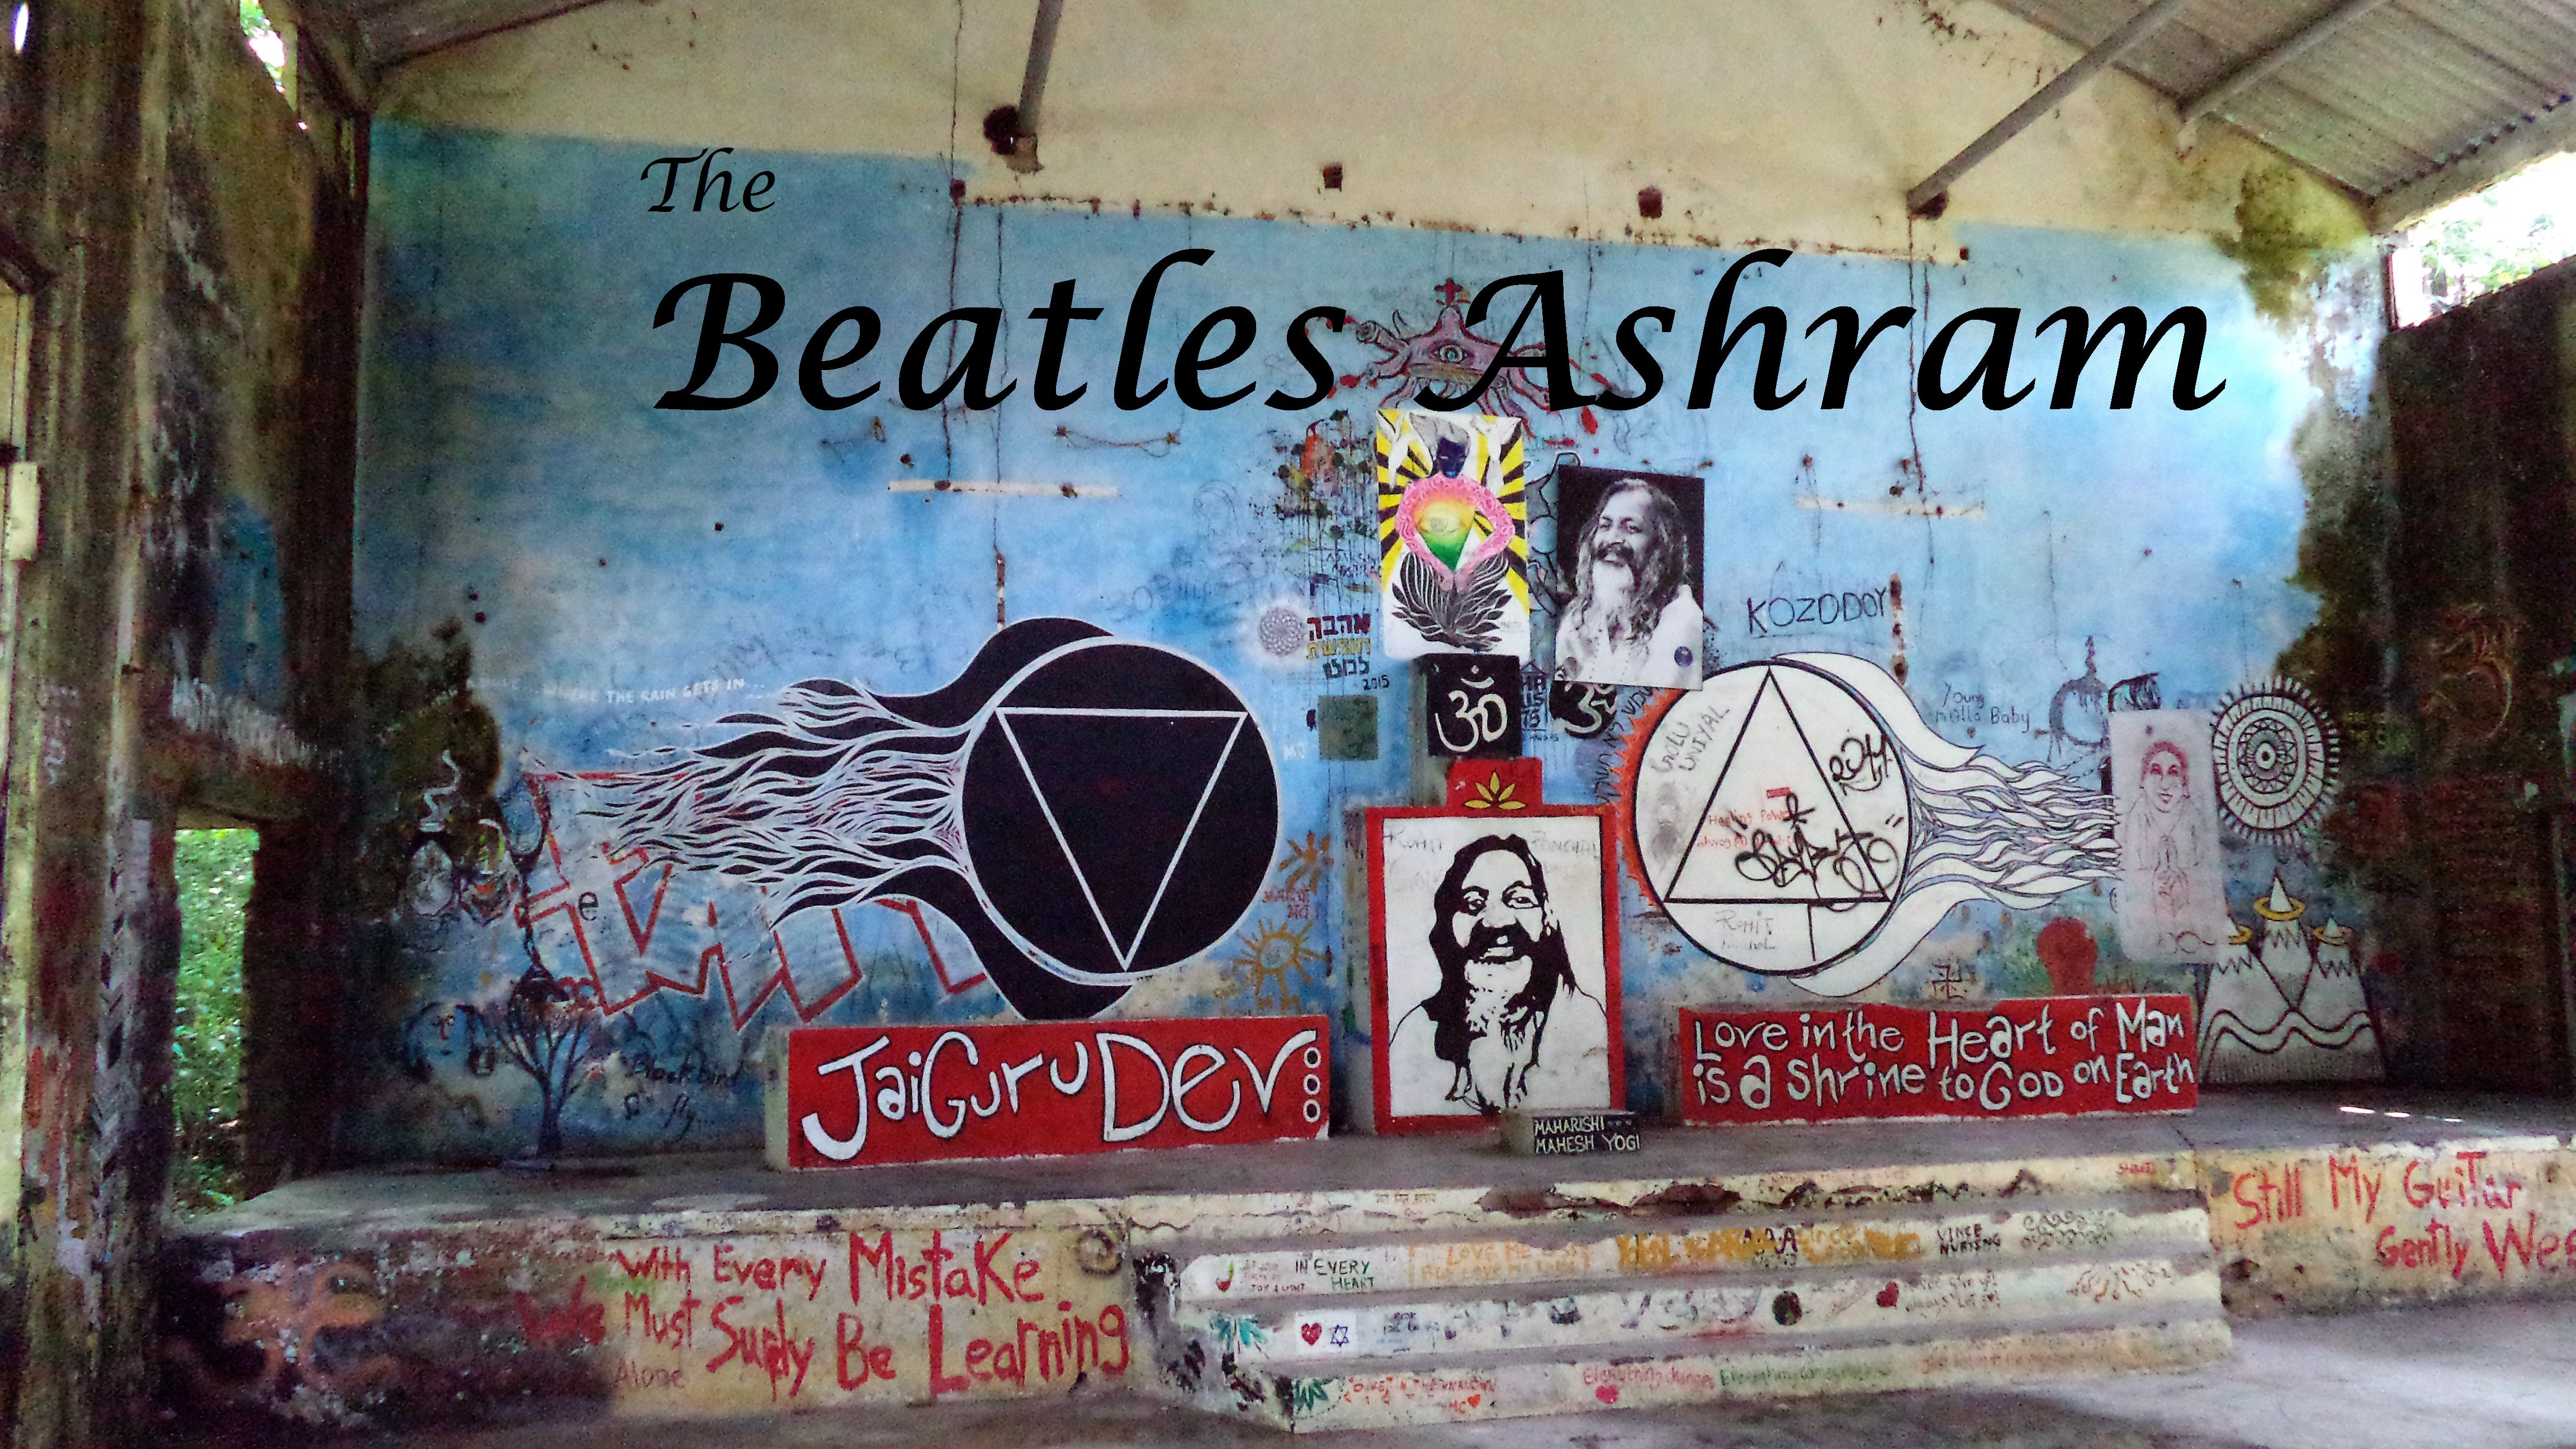 Beatles-Cathedral-Altar-close-up-1